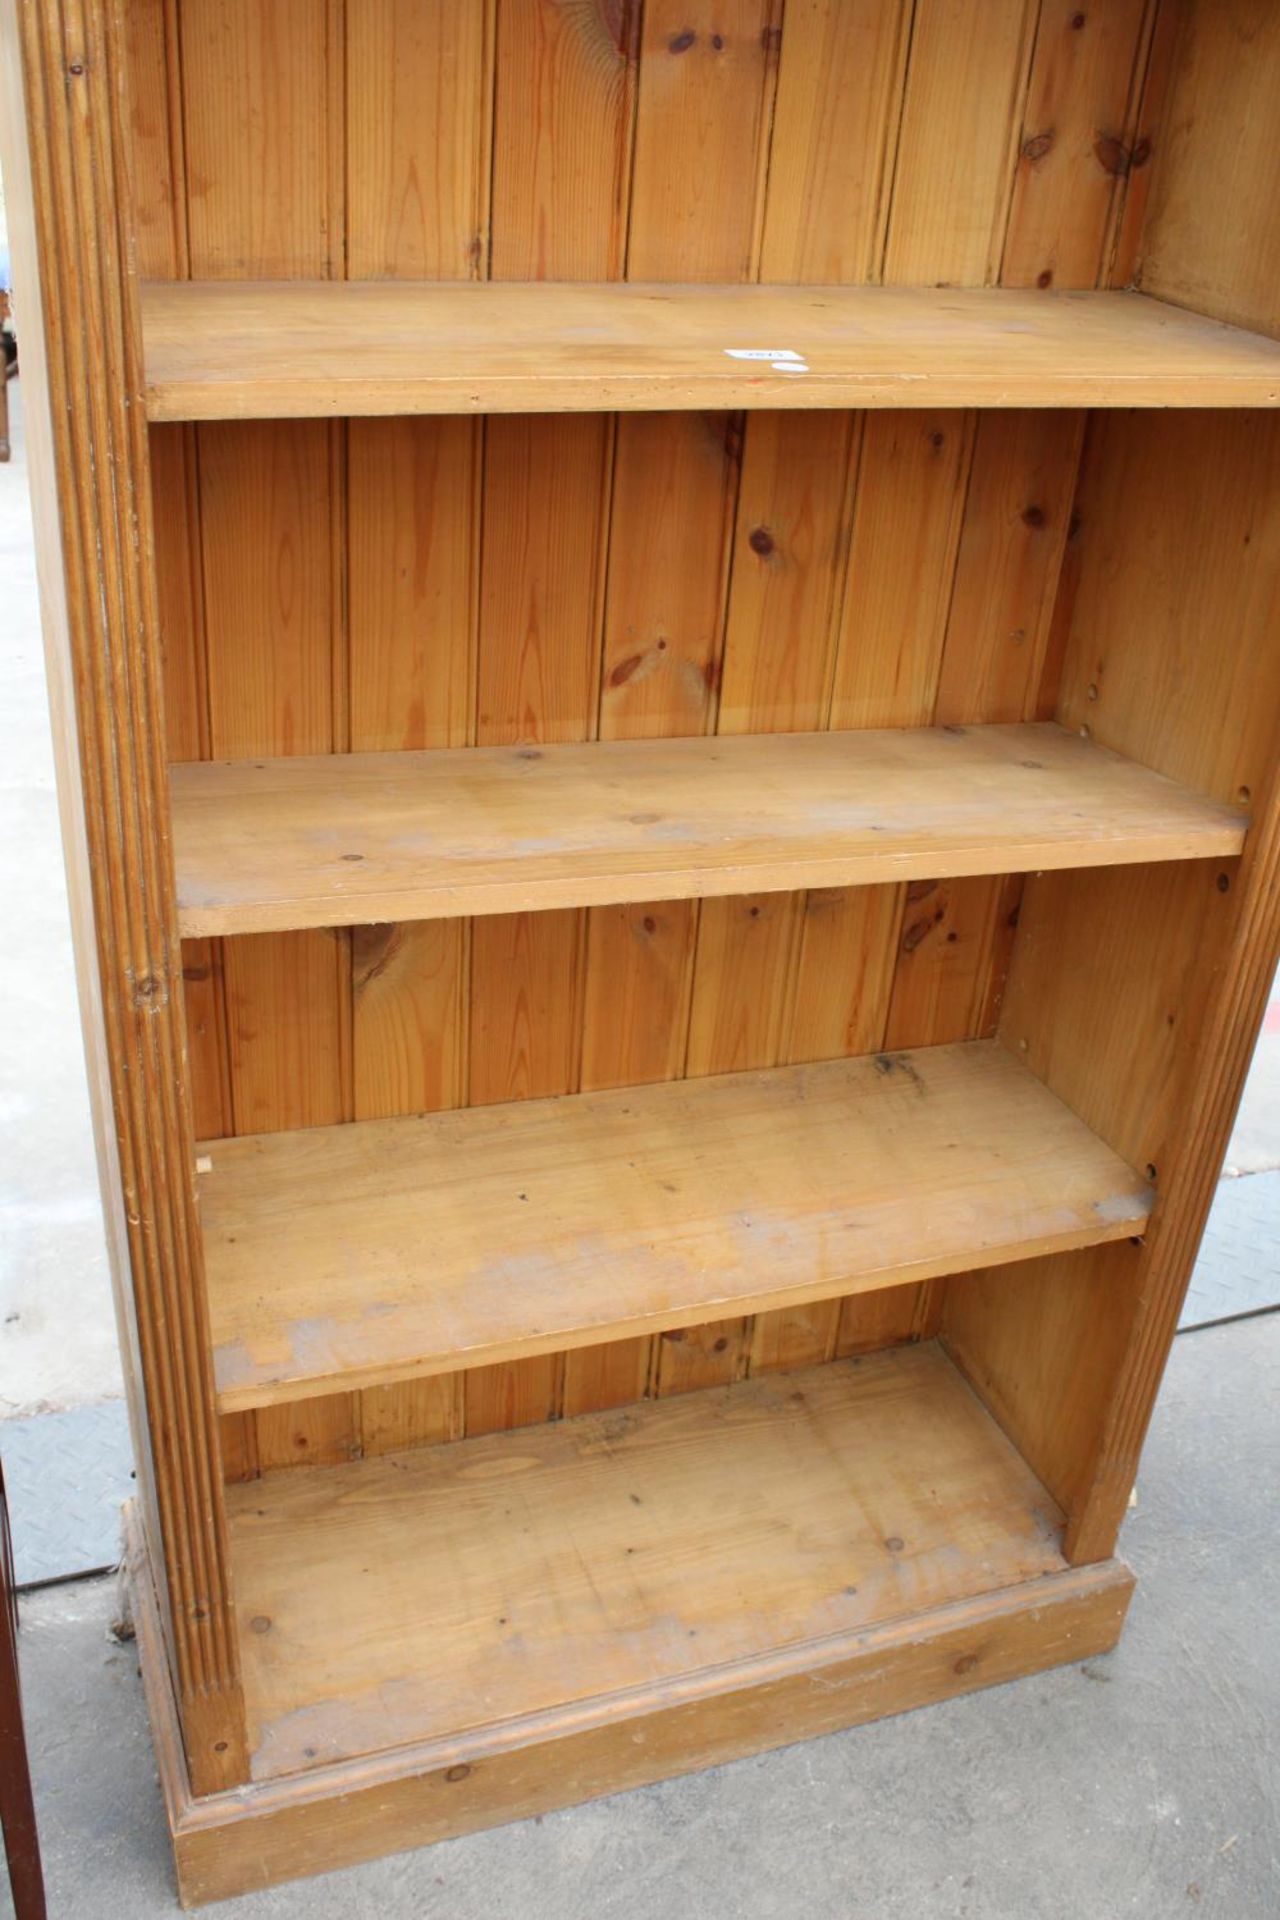 A MODERN PINE FIVE TIER OPEN BOOKCASE, 34.5" WIDE - Image 3 of 3